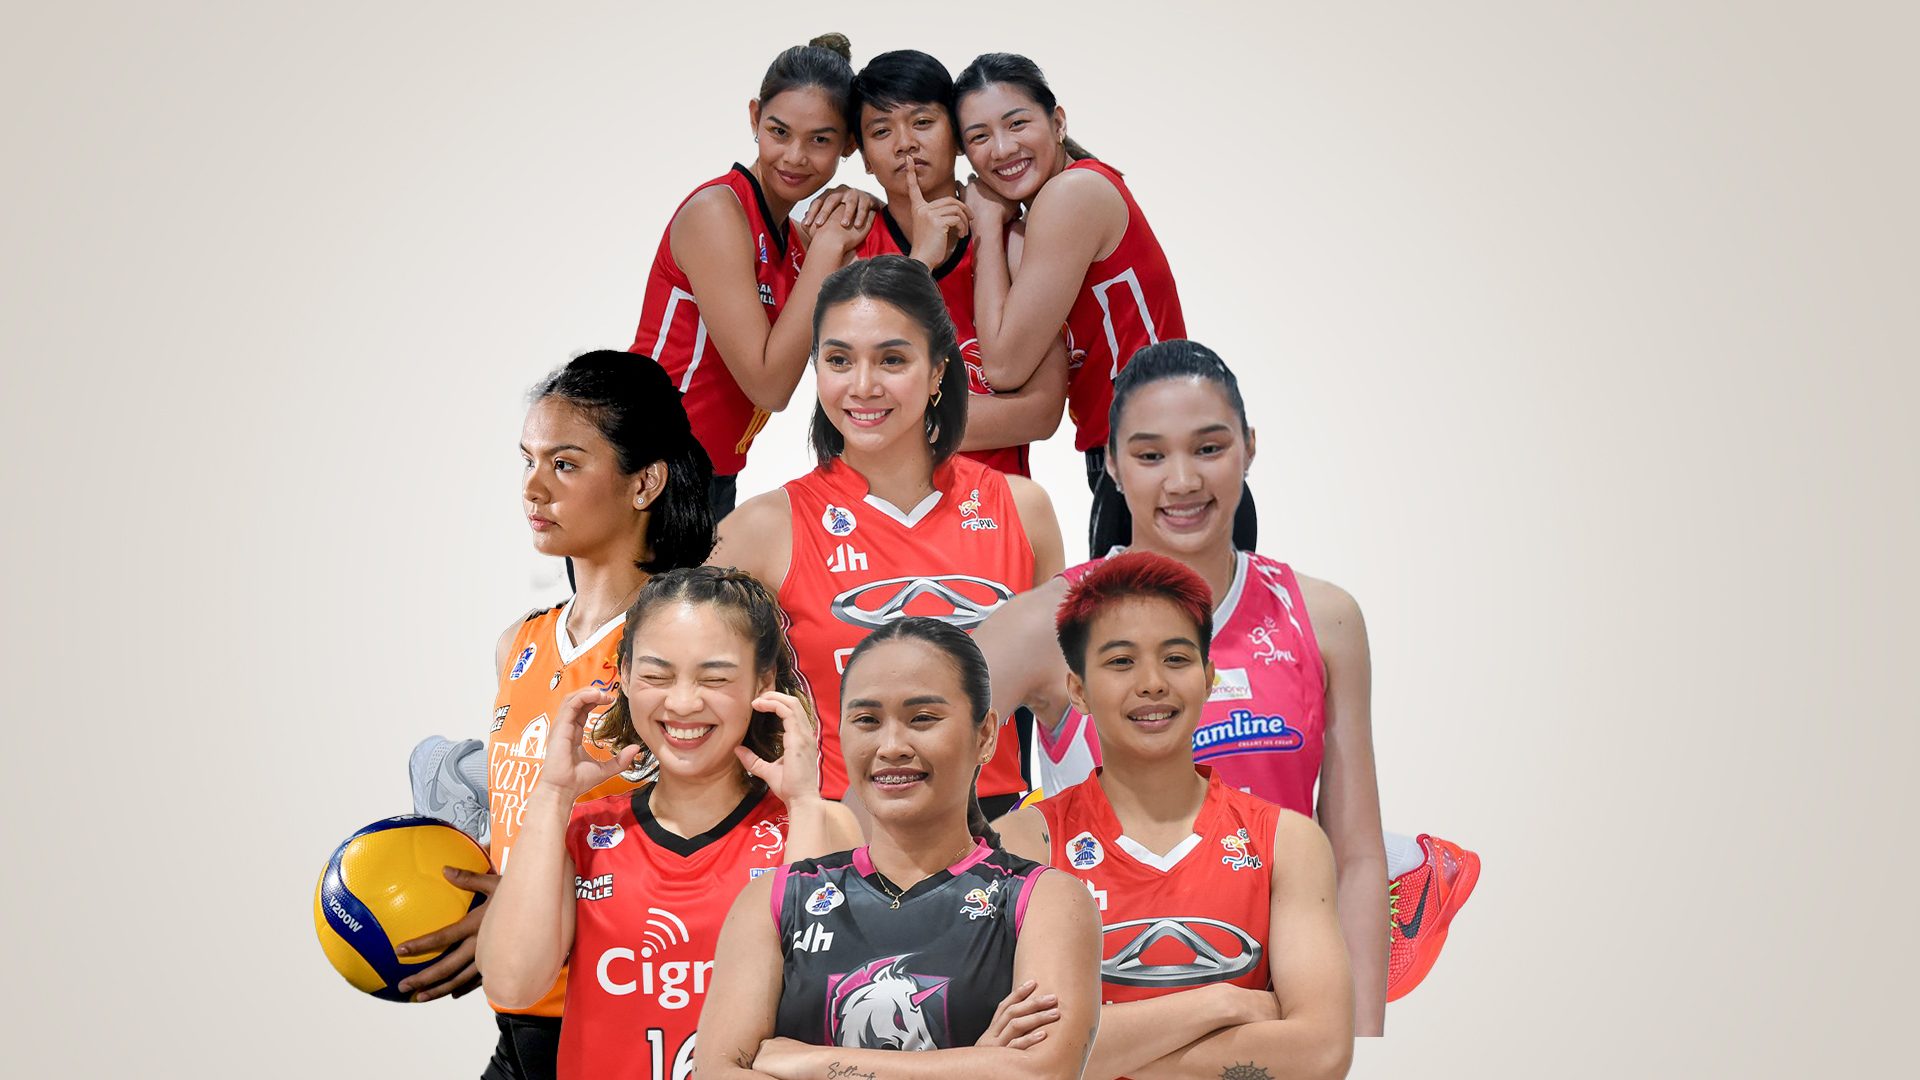 CATCH UP: Recapping PVL teams’ player moves after wild 2023 offseason